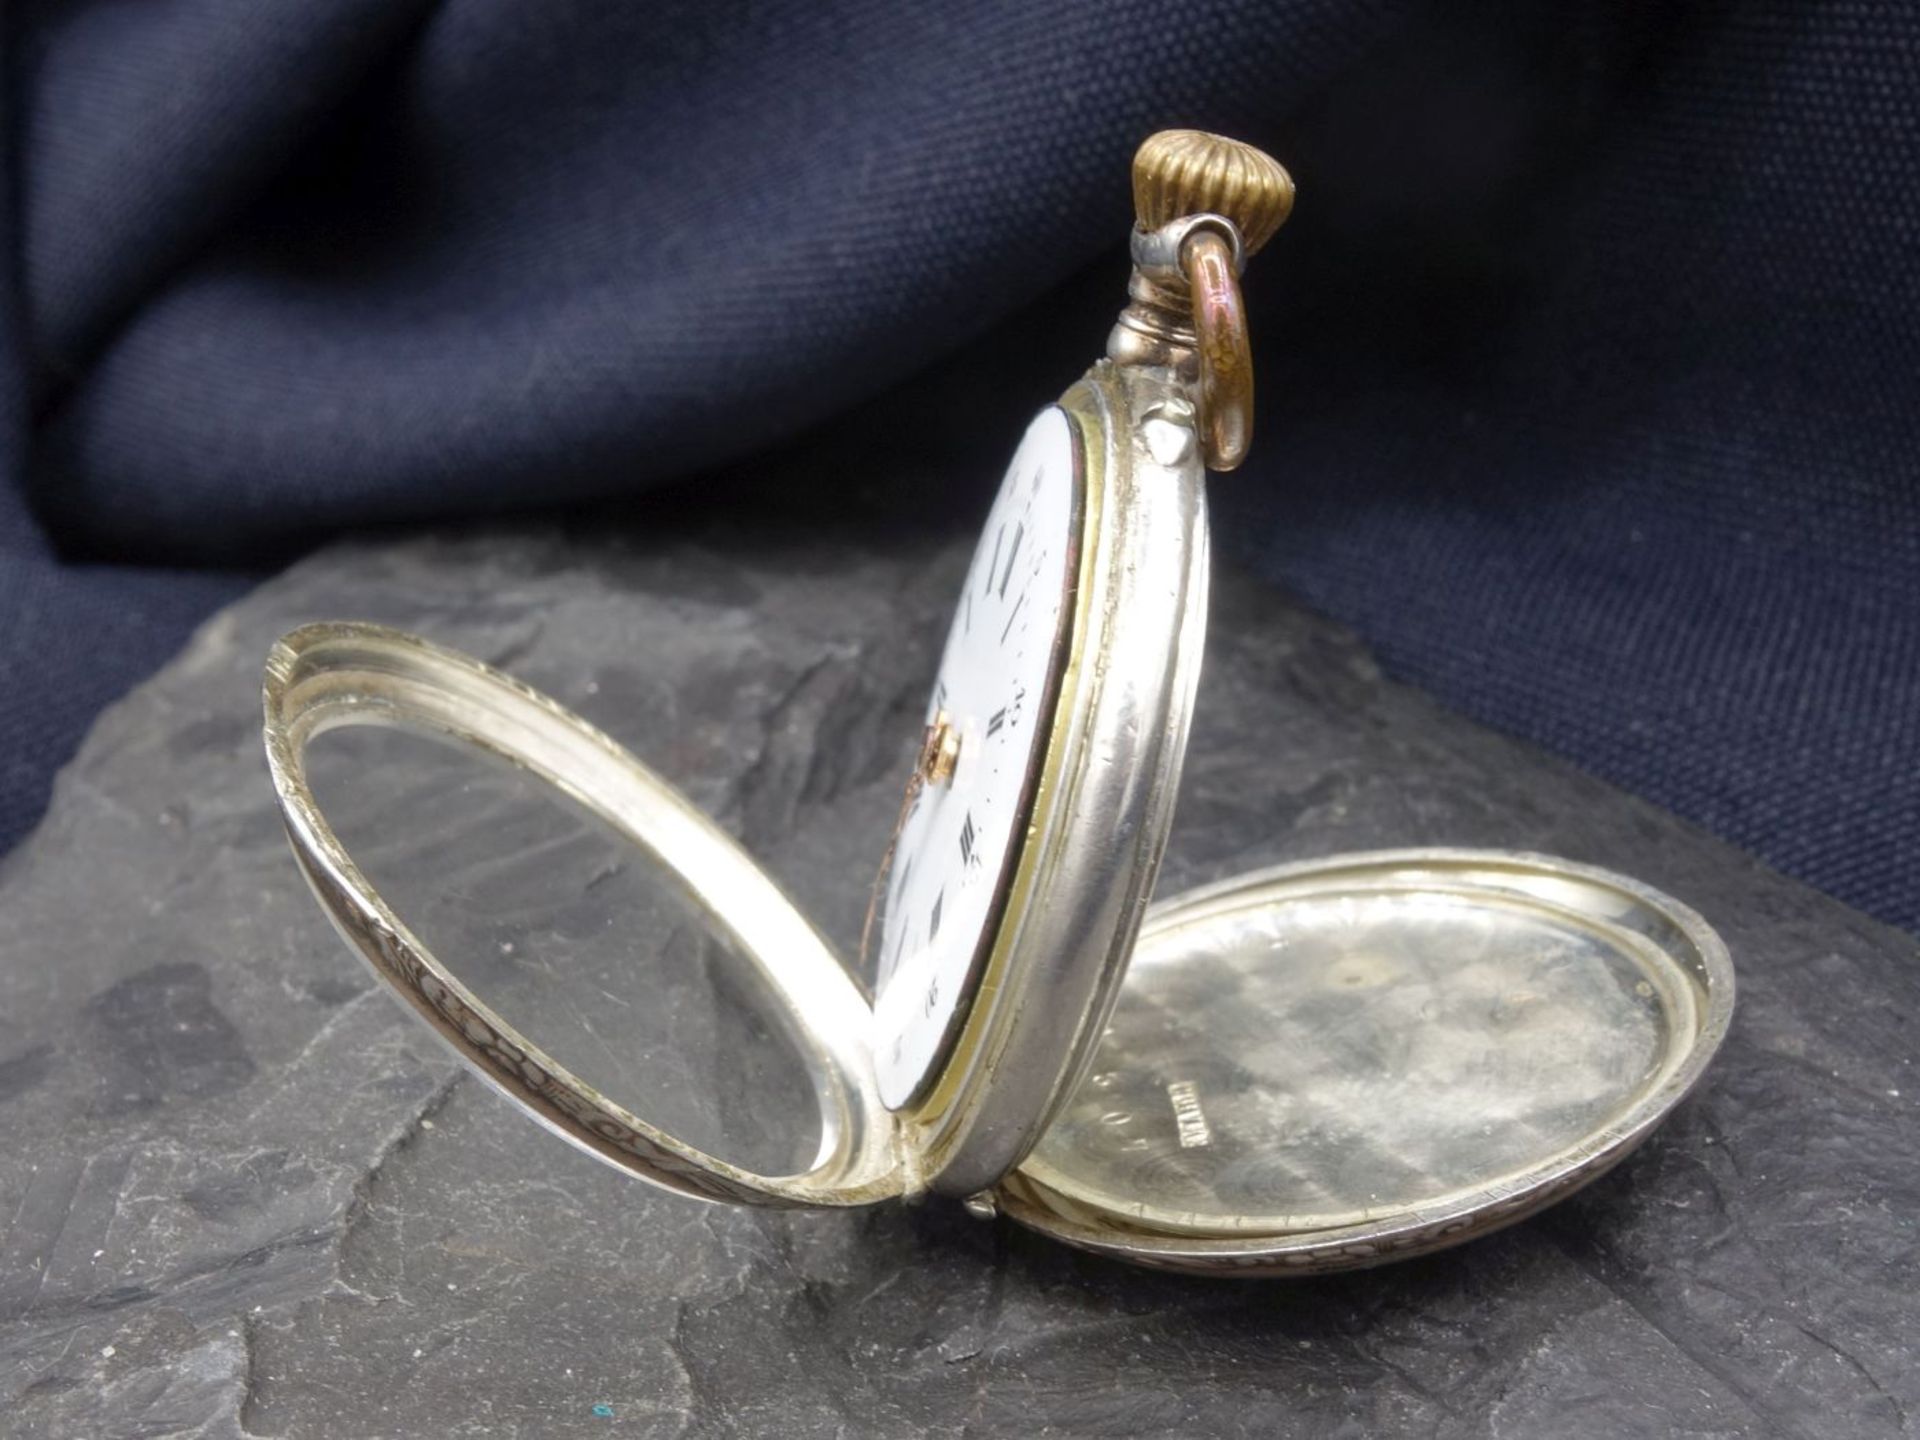 SMALL LADIES' POCKET WATCH IN GALONNÉ CASE / GALLONÉ POCKET WATCH - Image 2 of 5